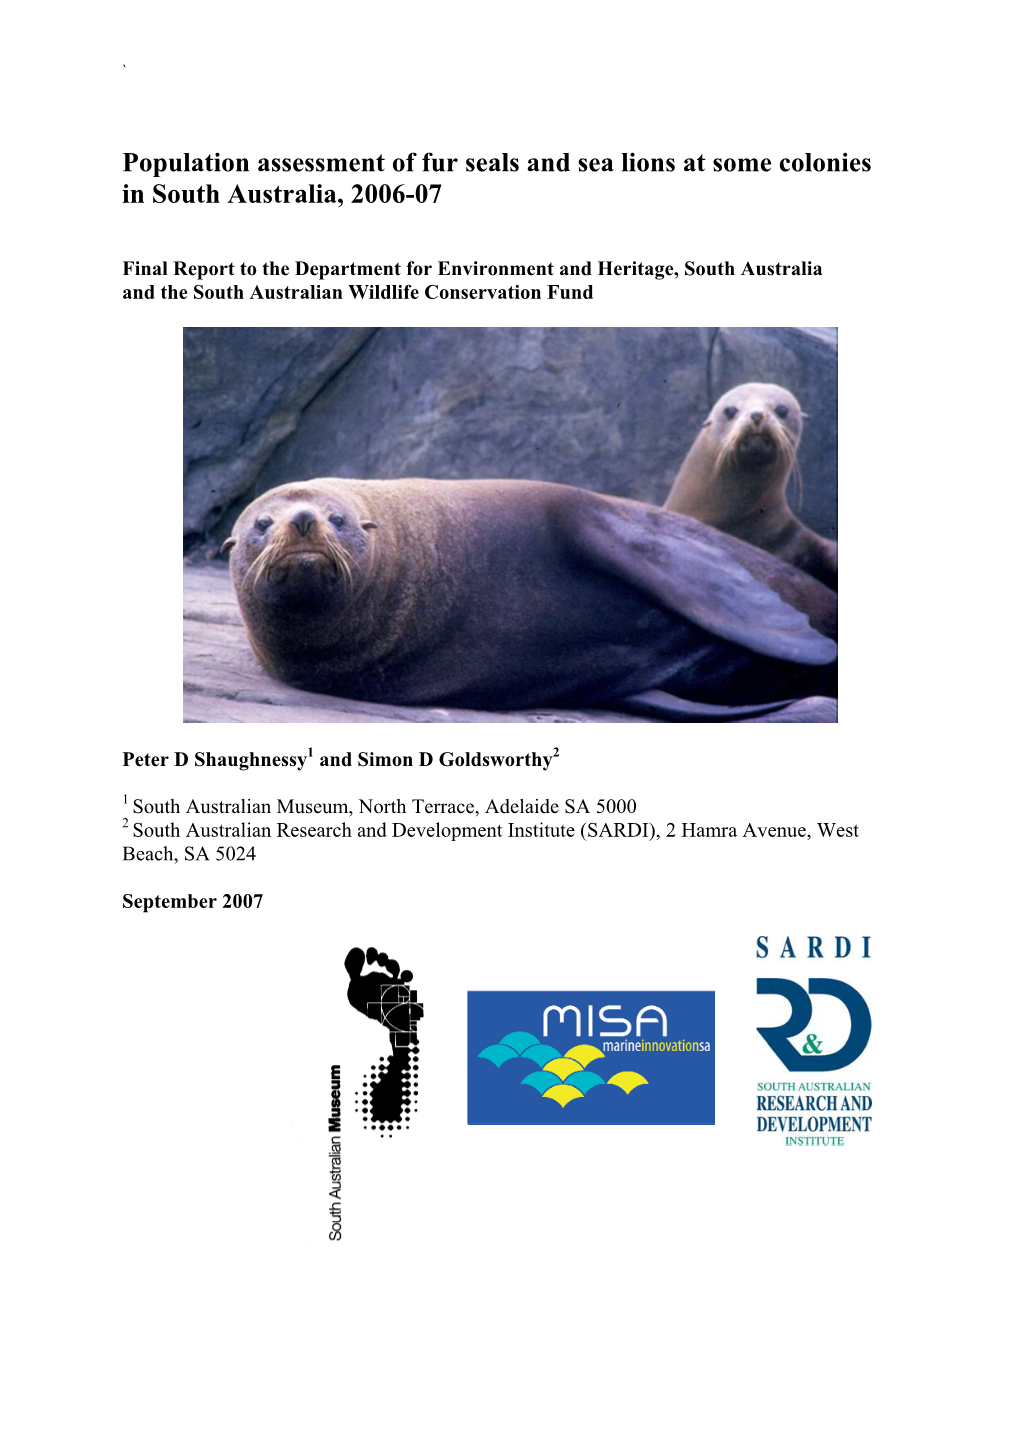 Population Assessment of Fur Seals and Sea Lions at Some Colonies in South Australia, 2006-07